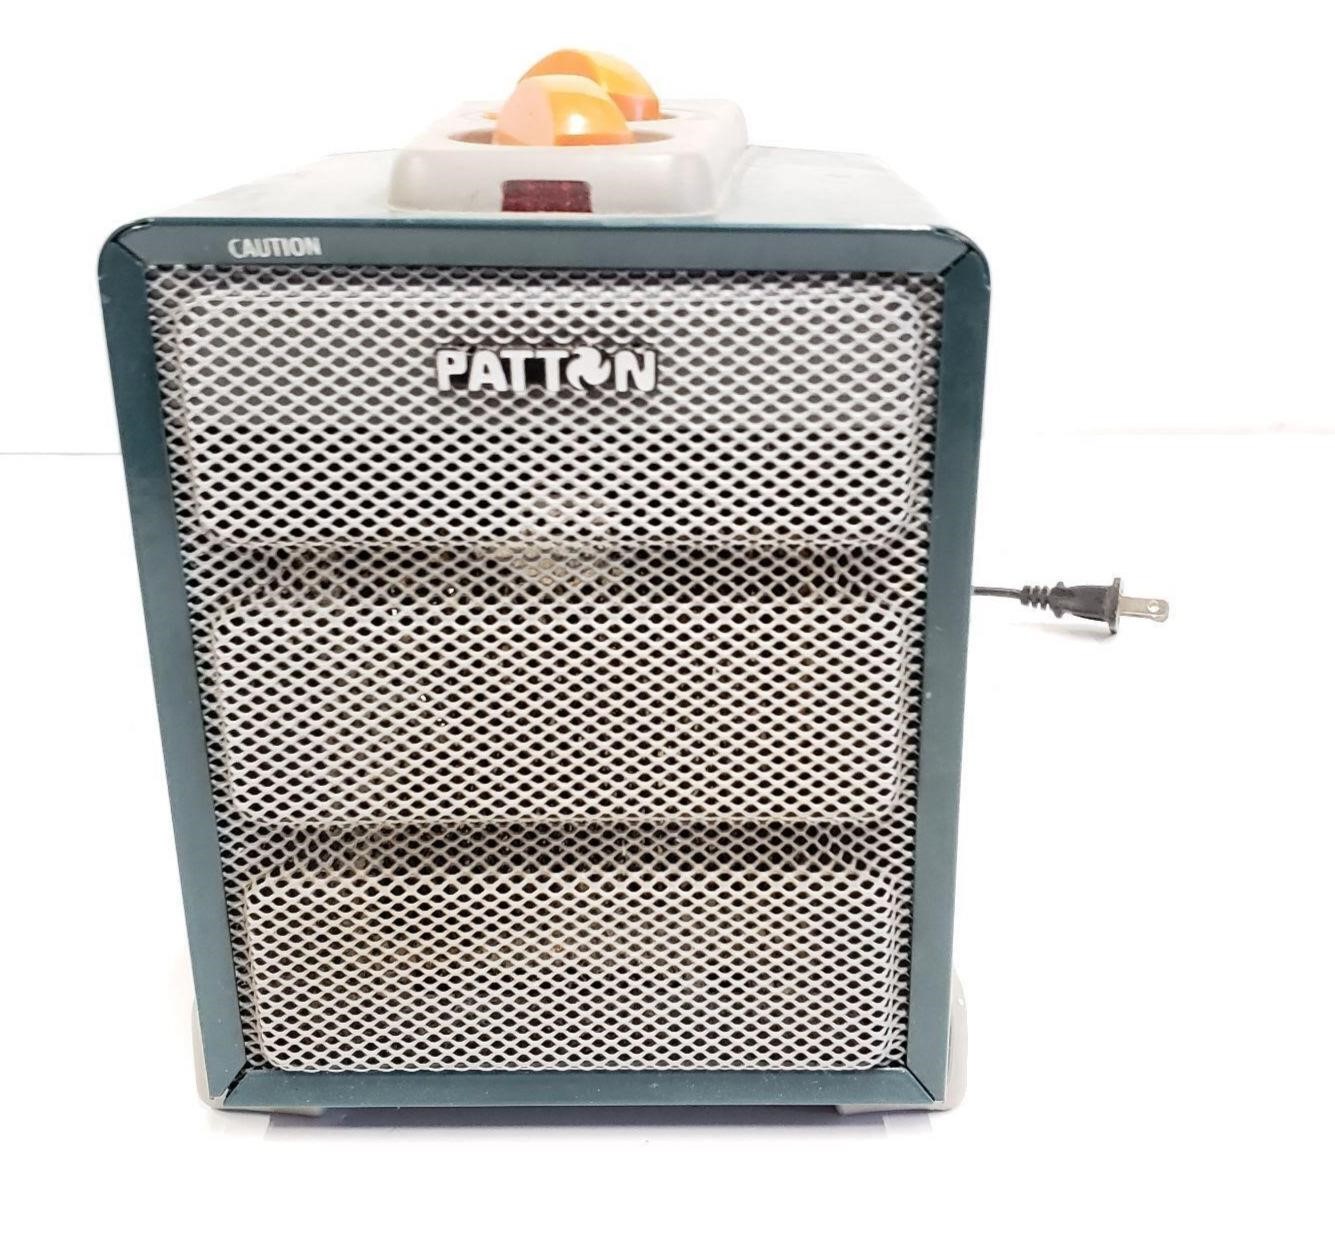 Patton Personal Electric Heater